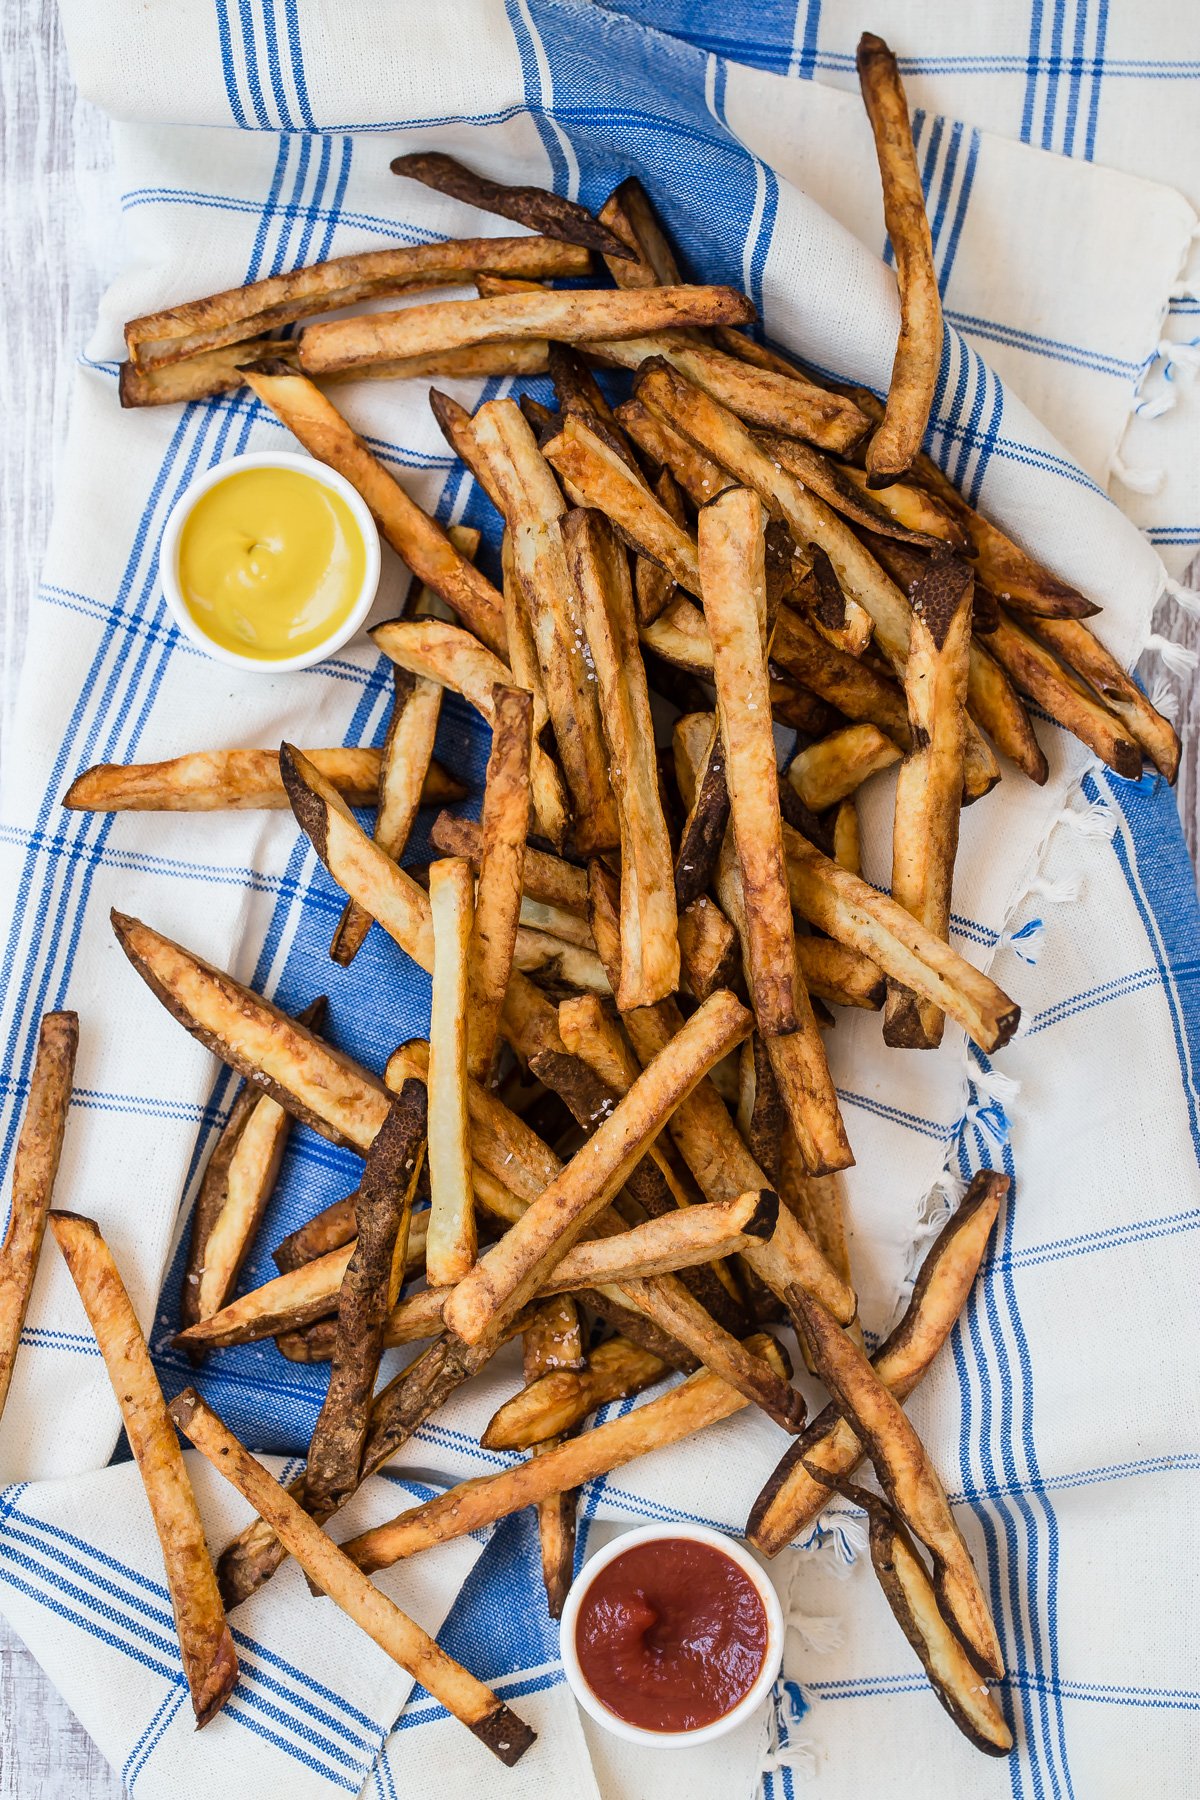 Air fryer french fries served with ketchup and honey mustard.